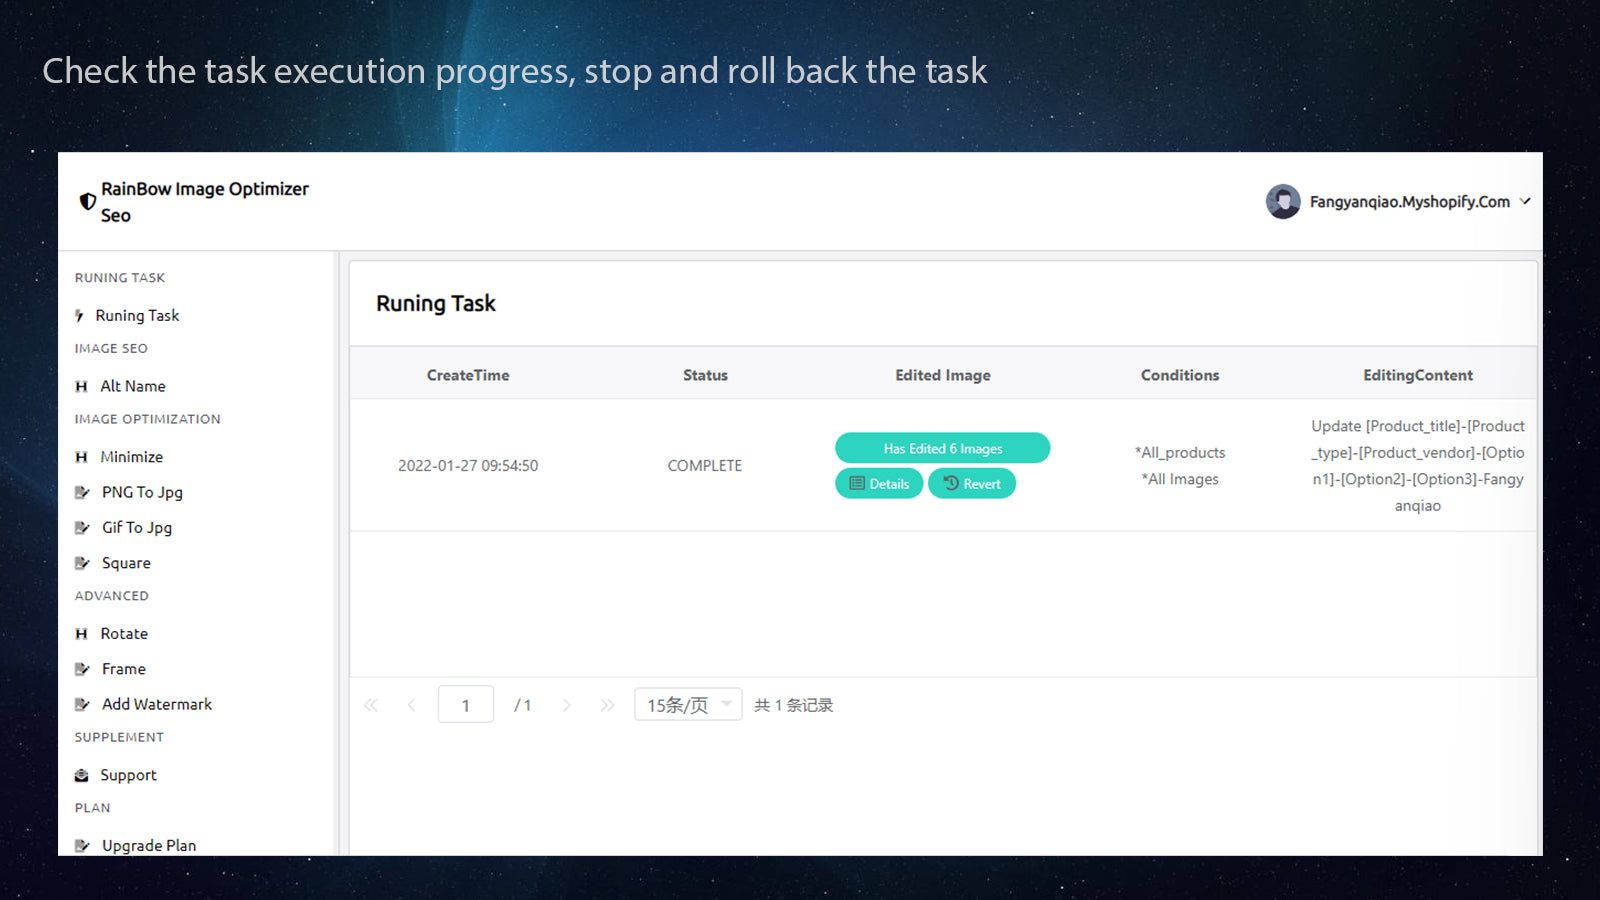 Real time task progress, one click stop / rollback task